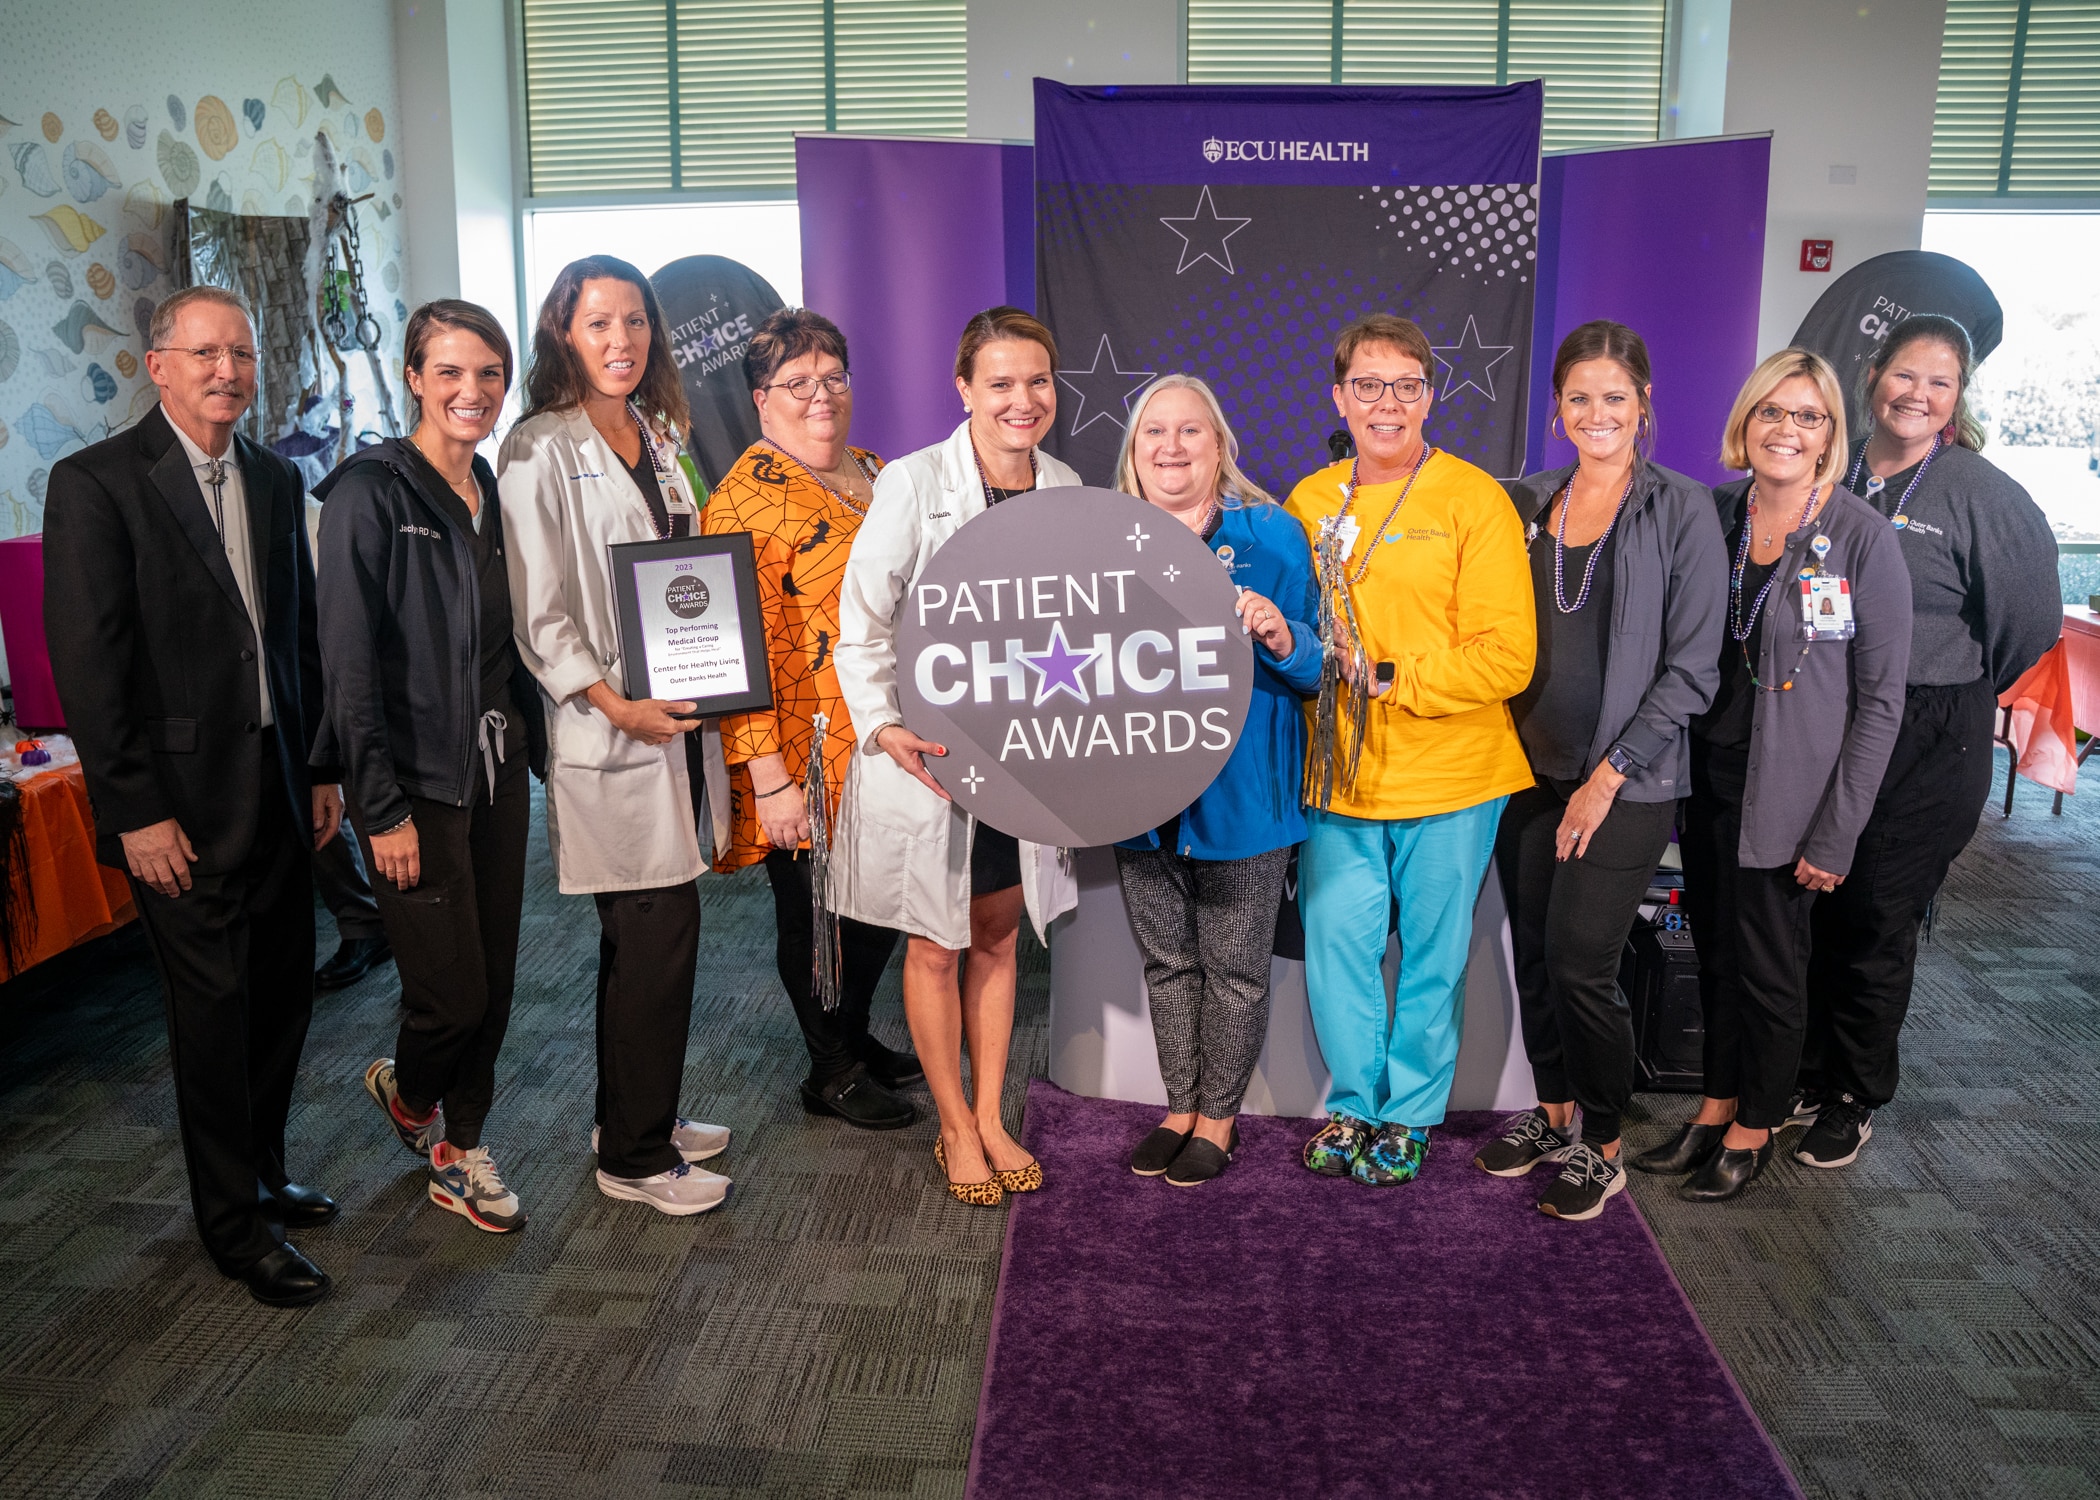 The Outer Banks Health Center for Healthy Living team gathers for a group photo to celebrate earning a Patient Choice Award.